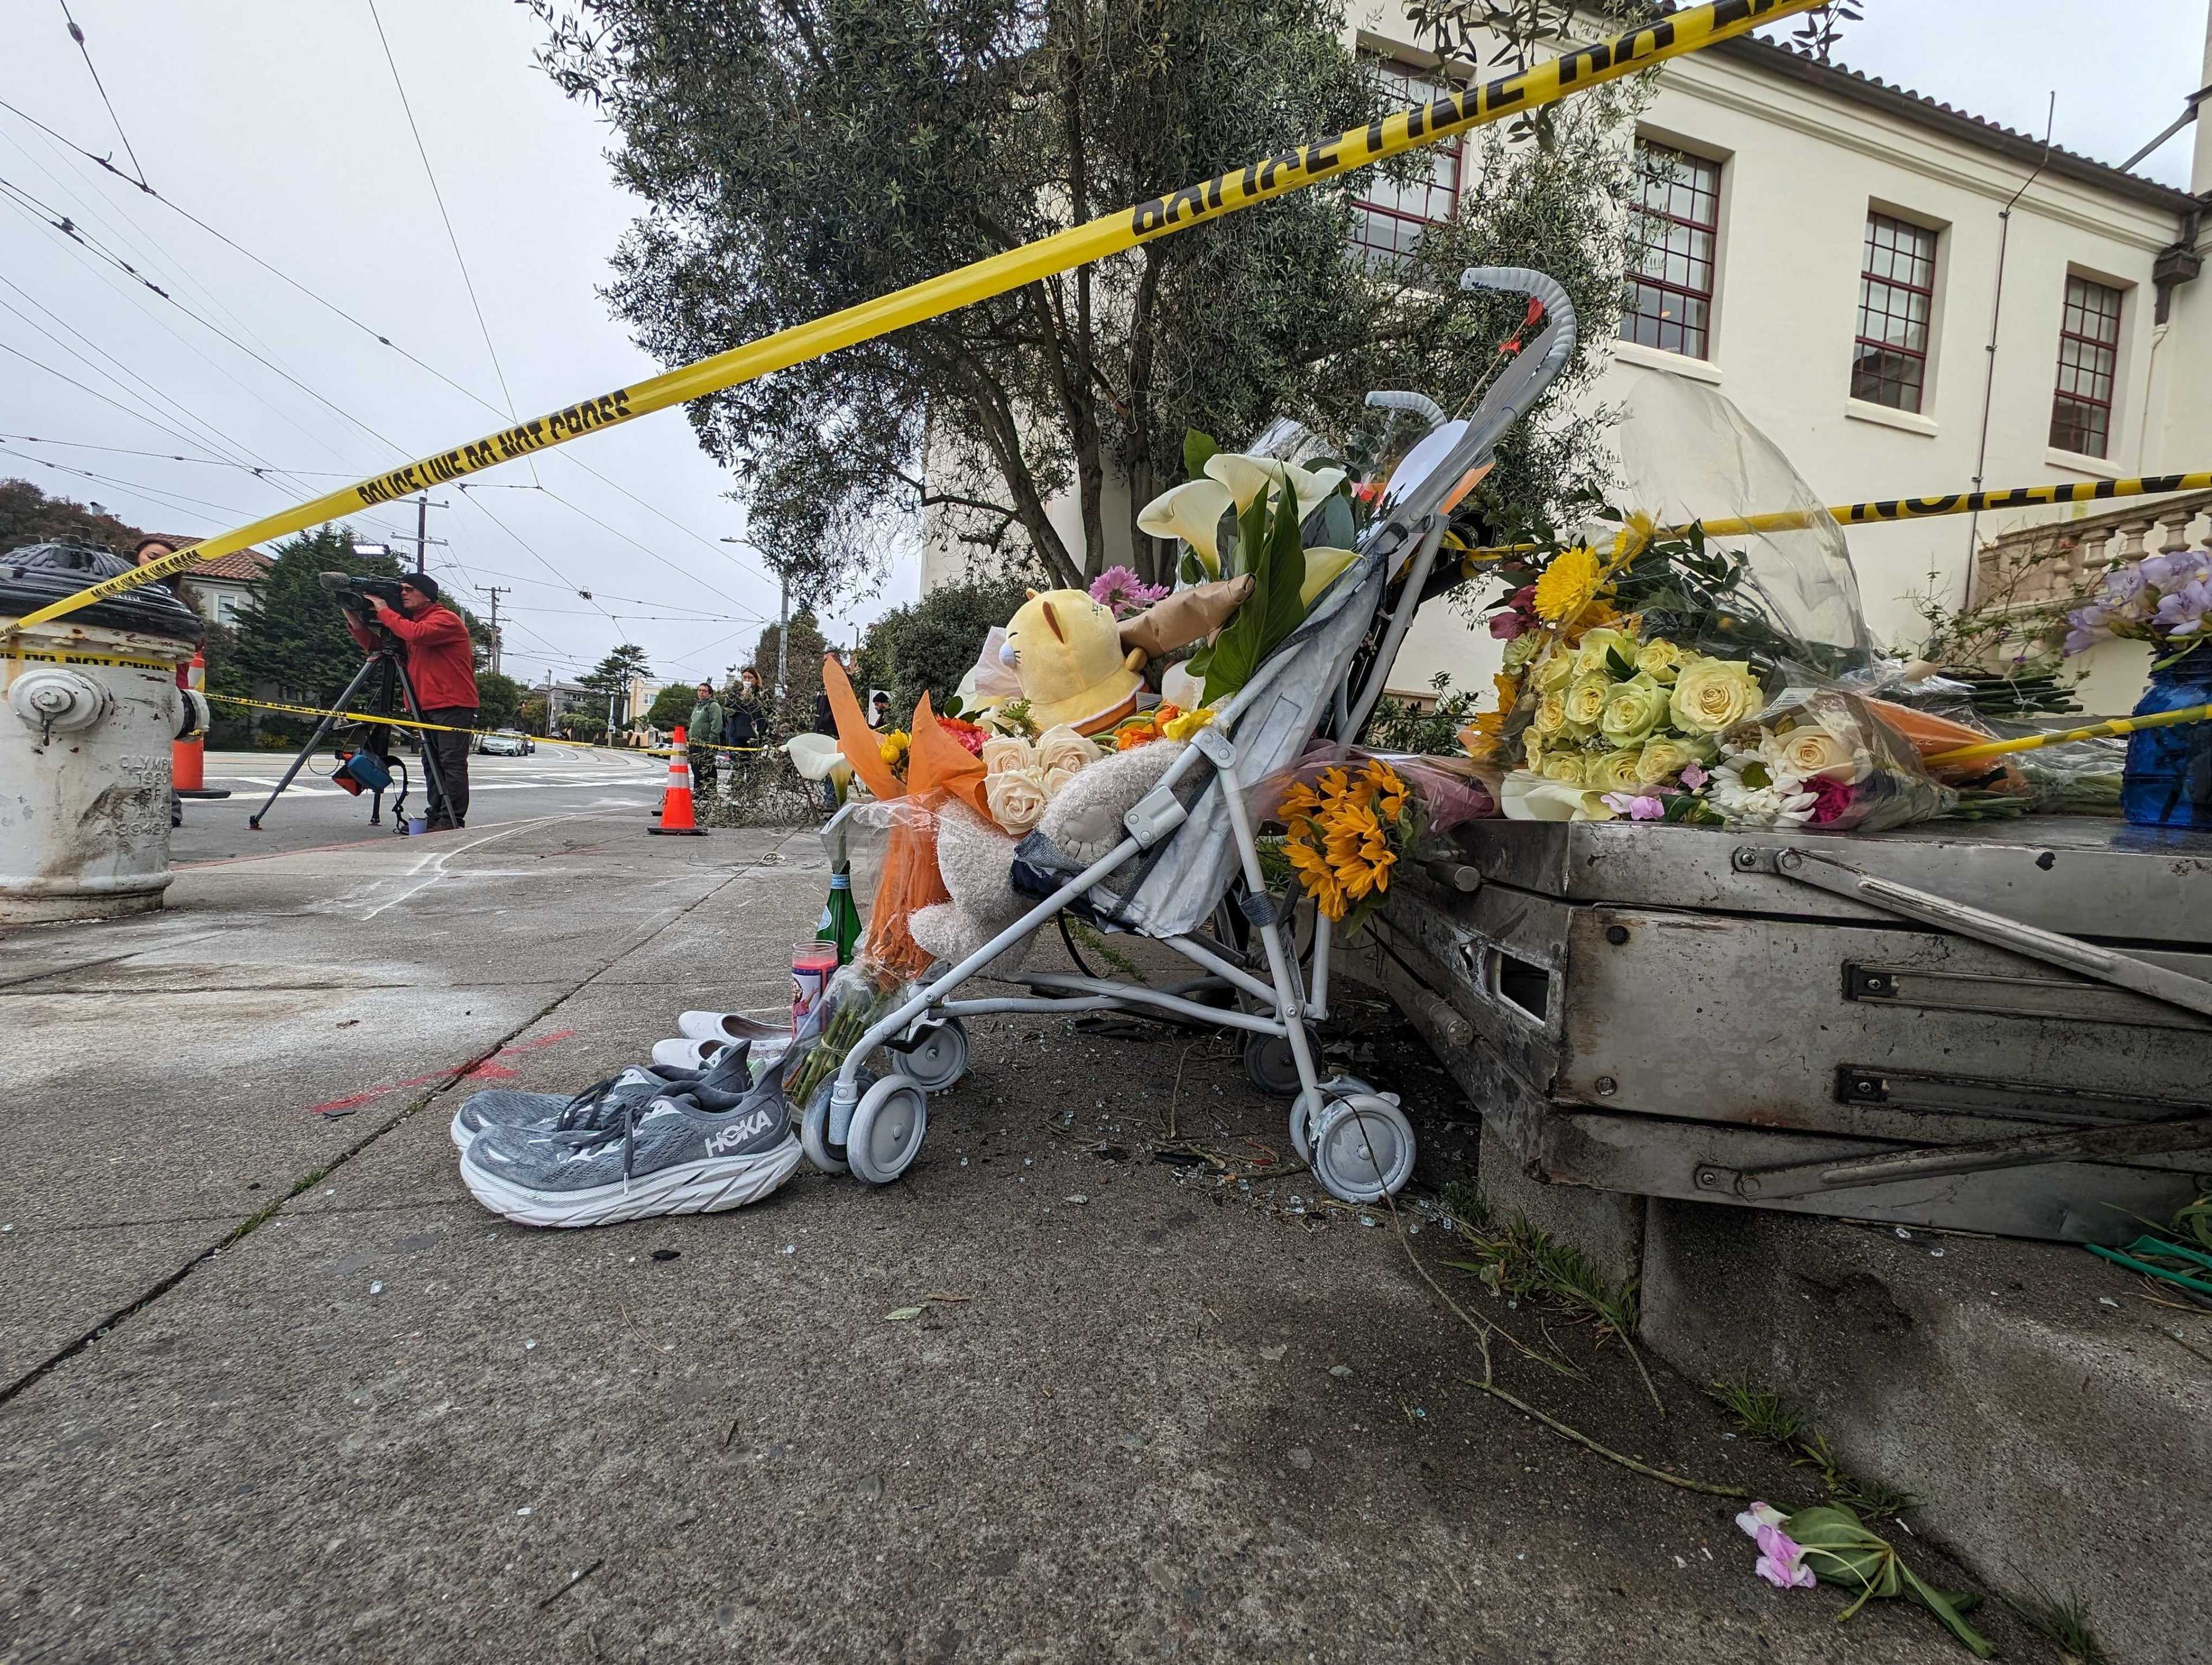 A street corner with flowers, a stroller, and a caution tape, suggesting a makeshift memorial.